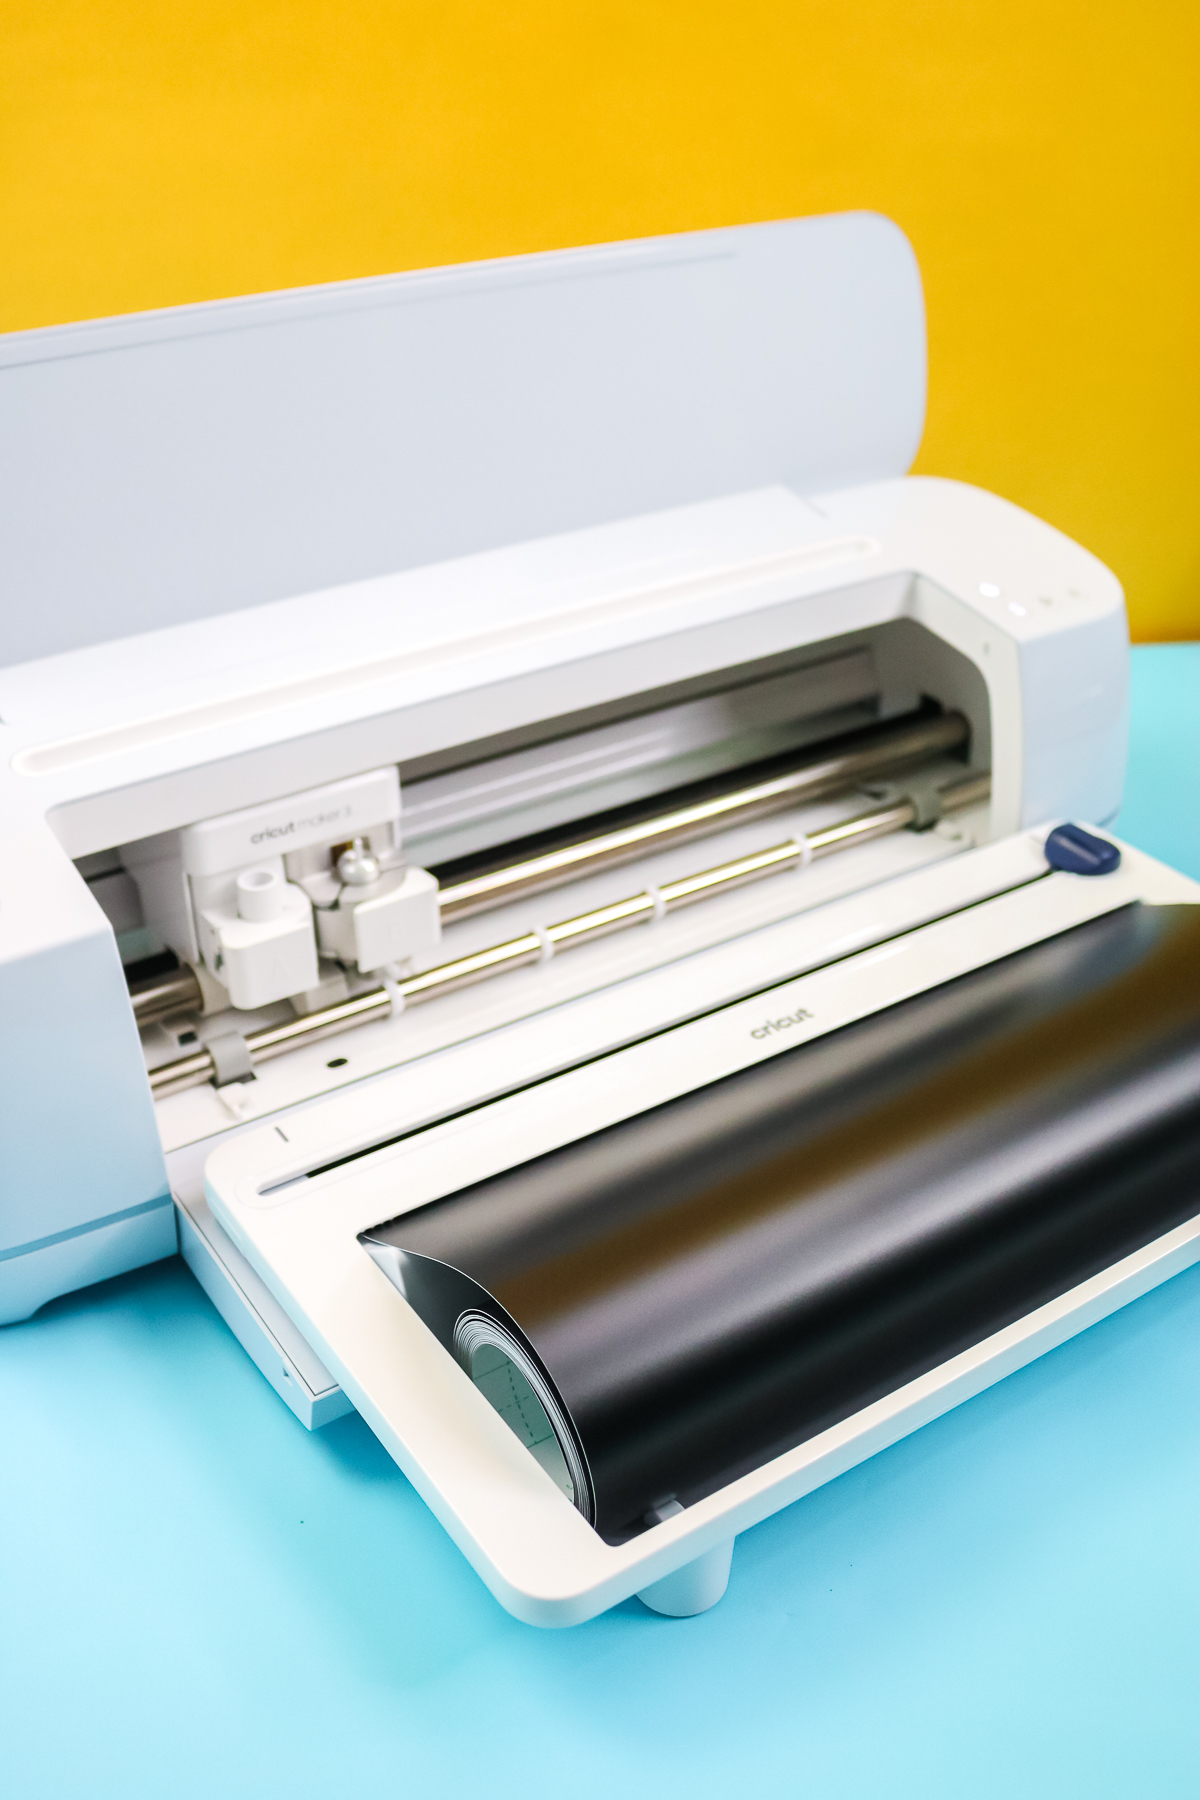 Cricut Roll Holder: How to Use This Attachment - Angie Holden The